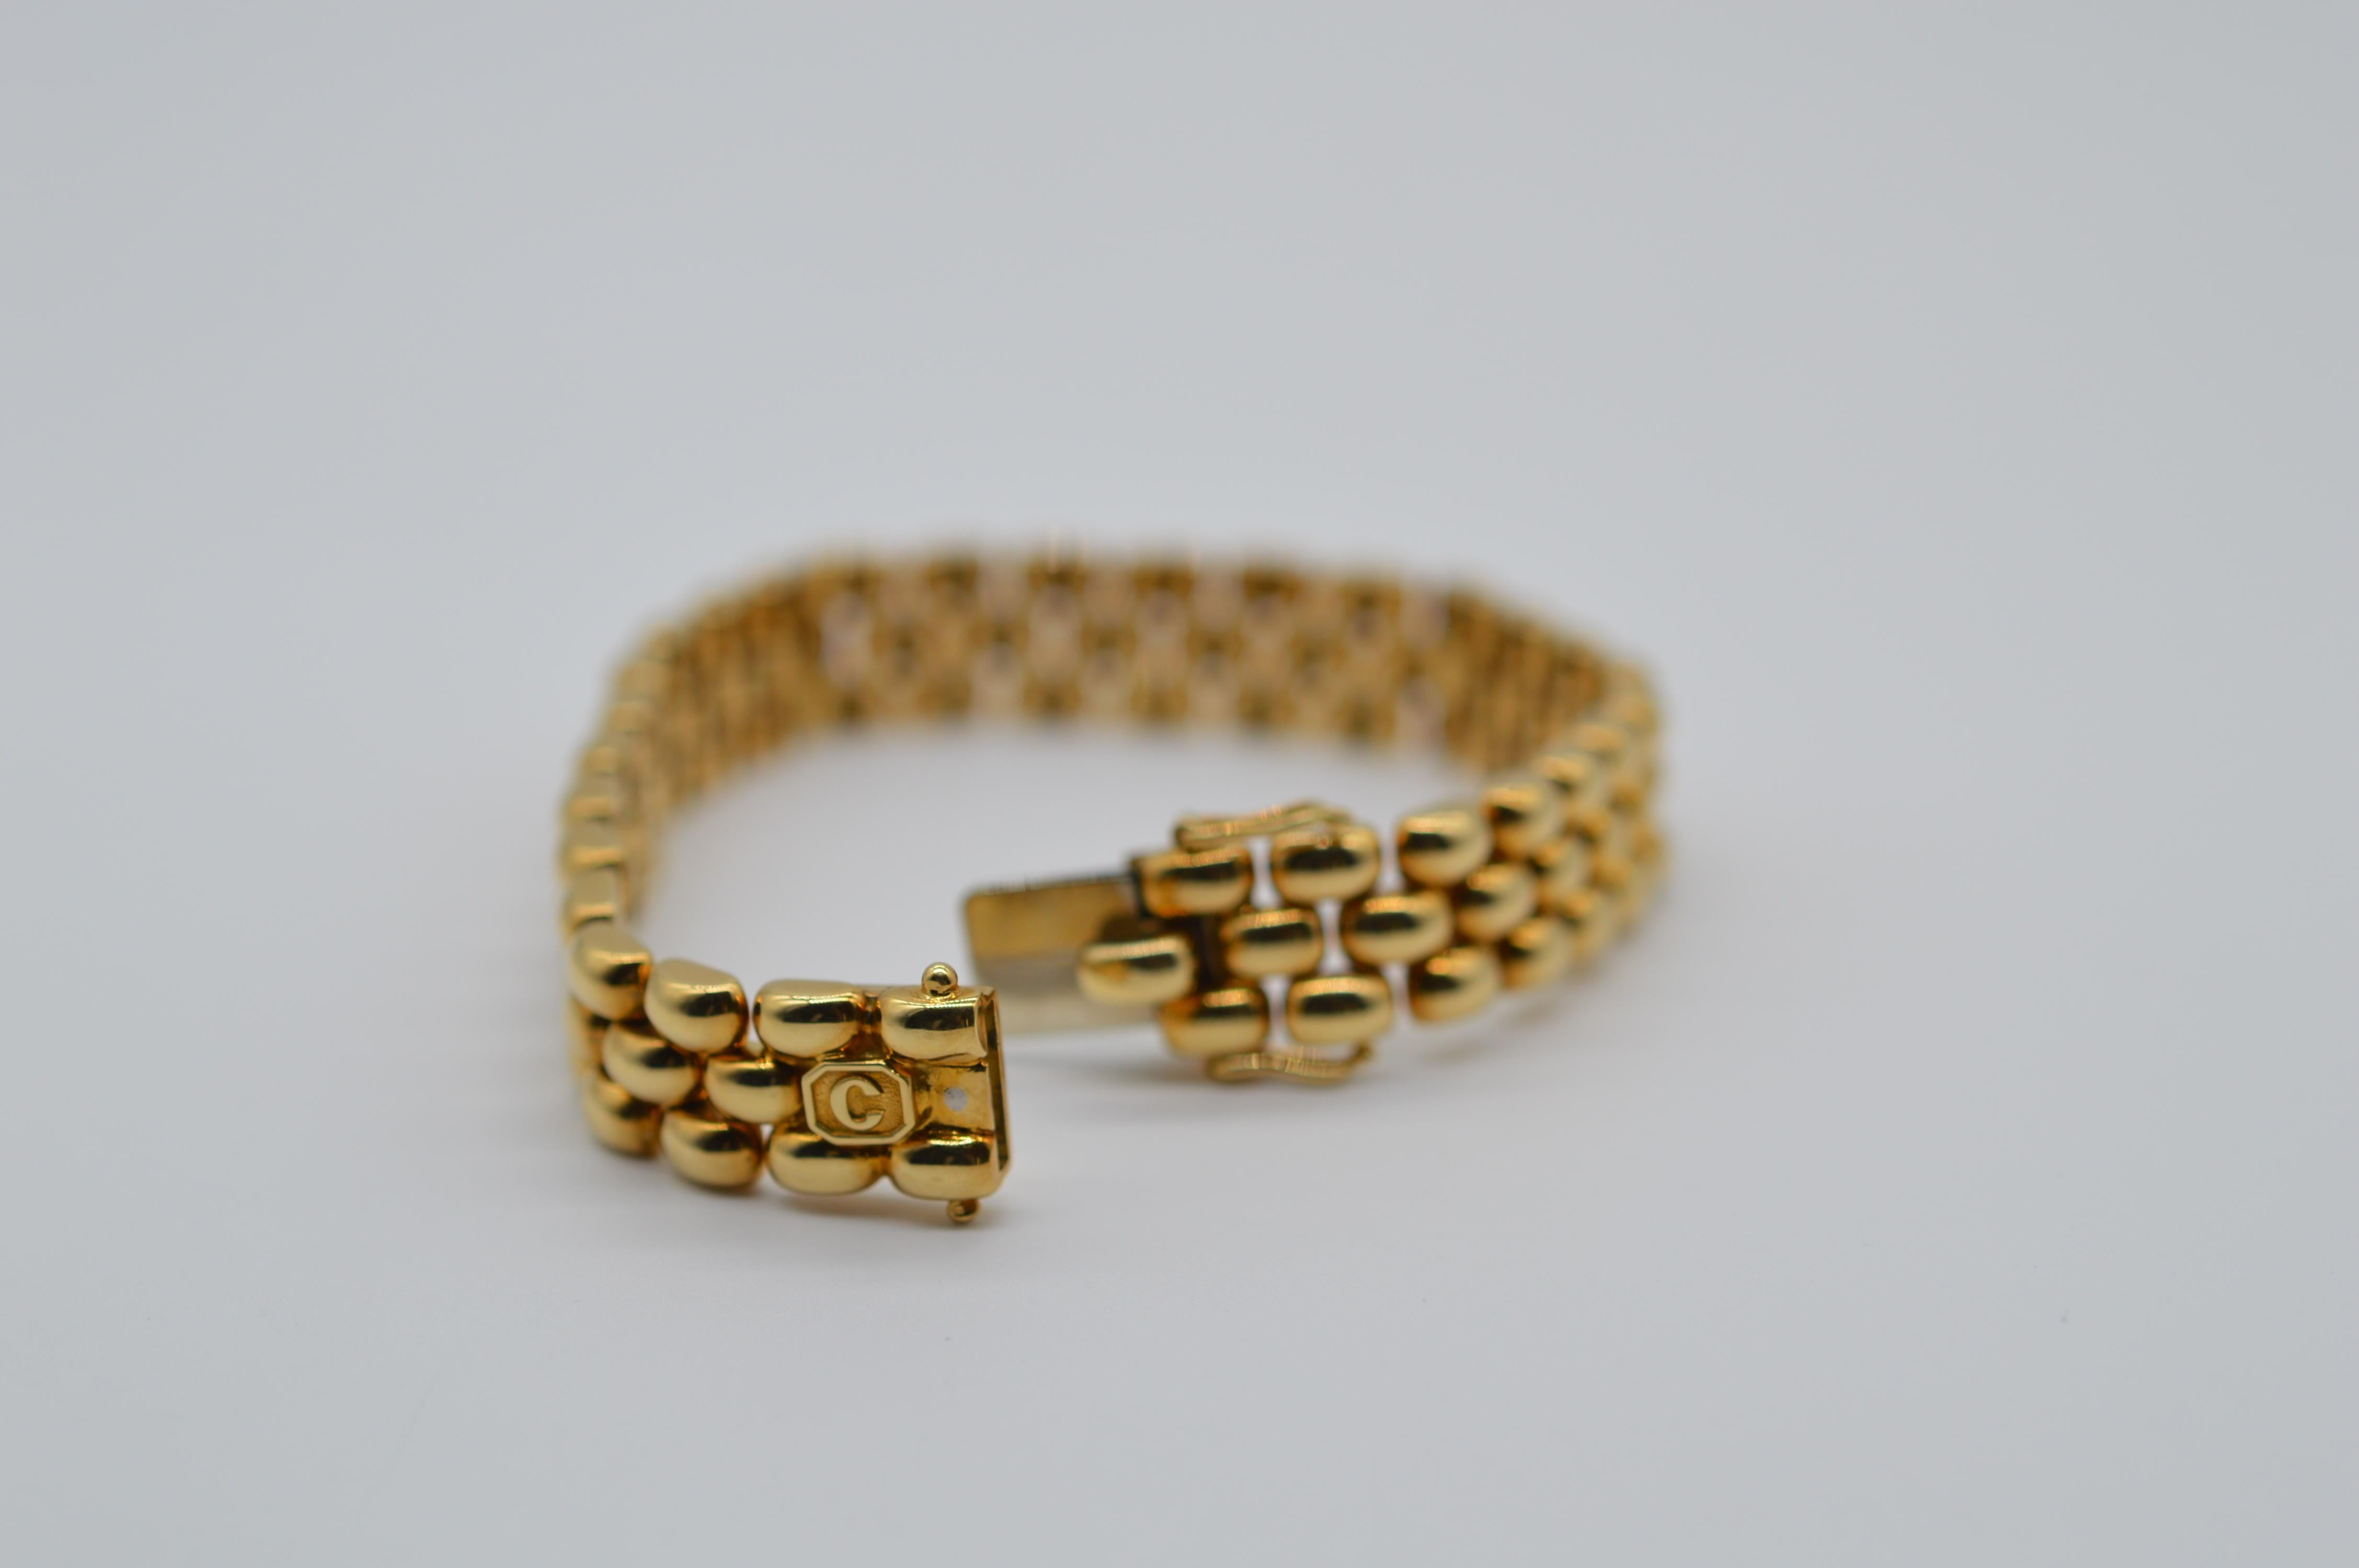 Chopard Gstaad Link Bracelet
18K Yellow Gold
Weight 55.5 grams
Vintage unworn condition
From 1990